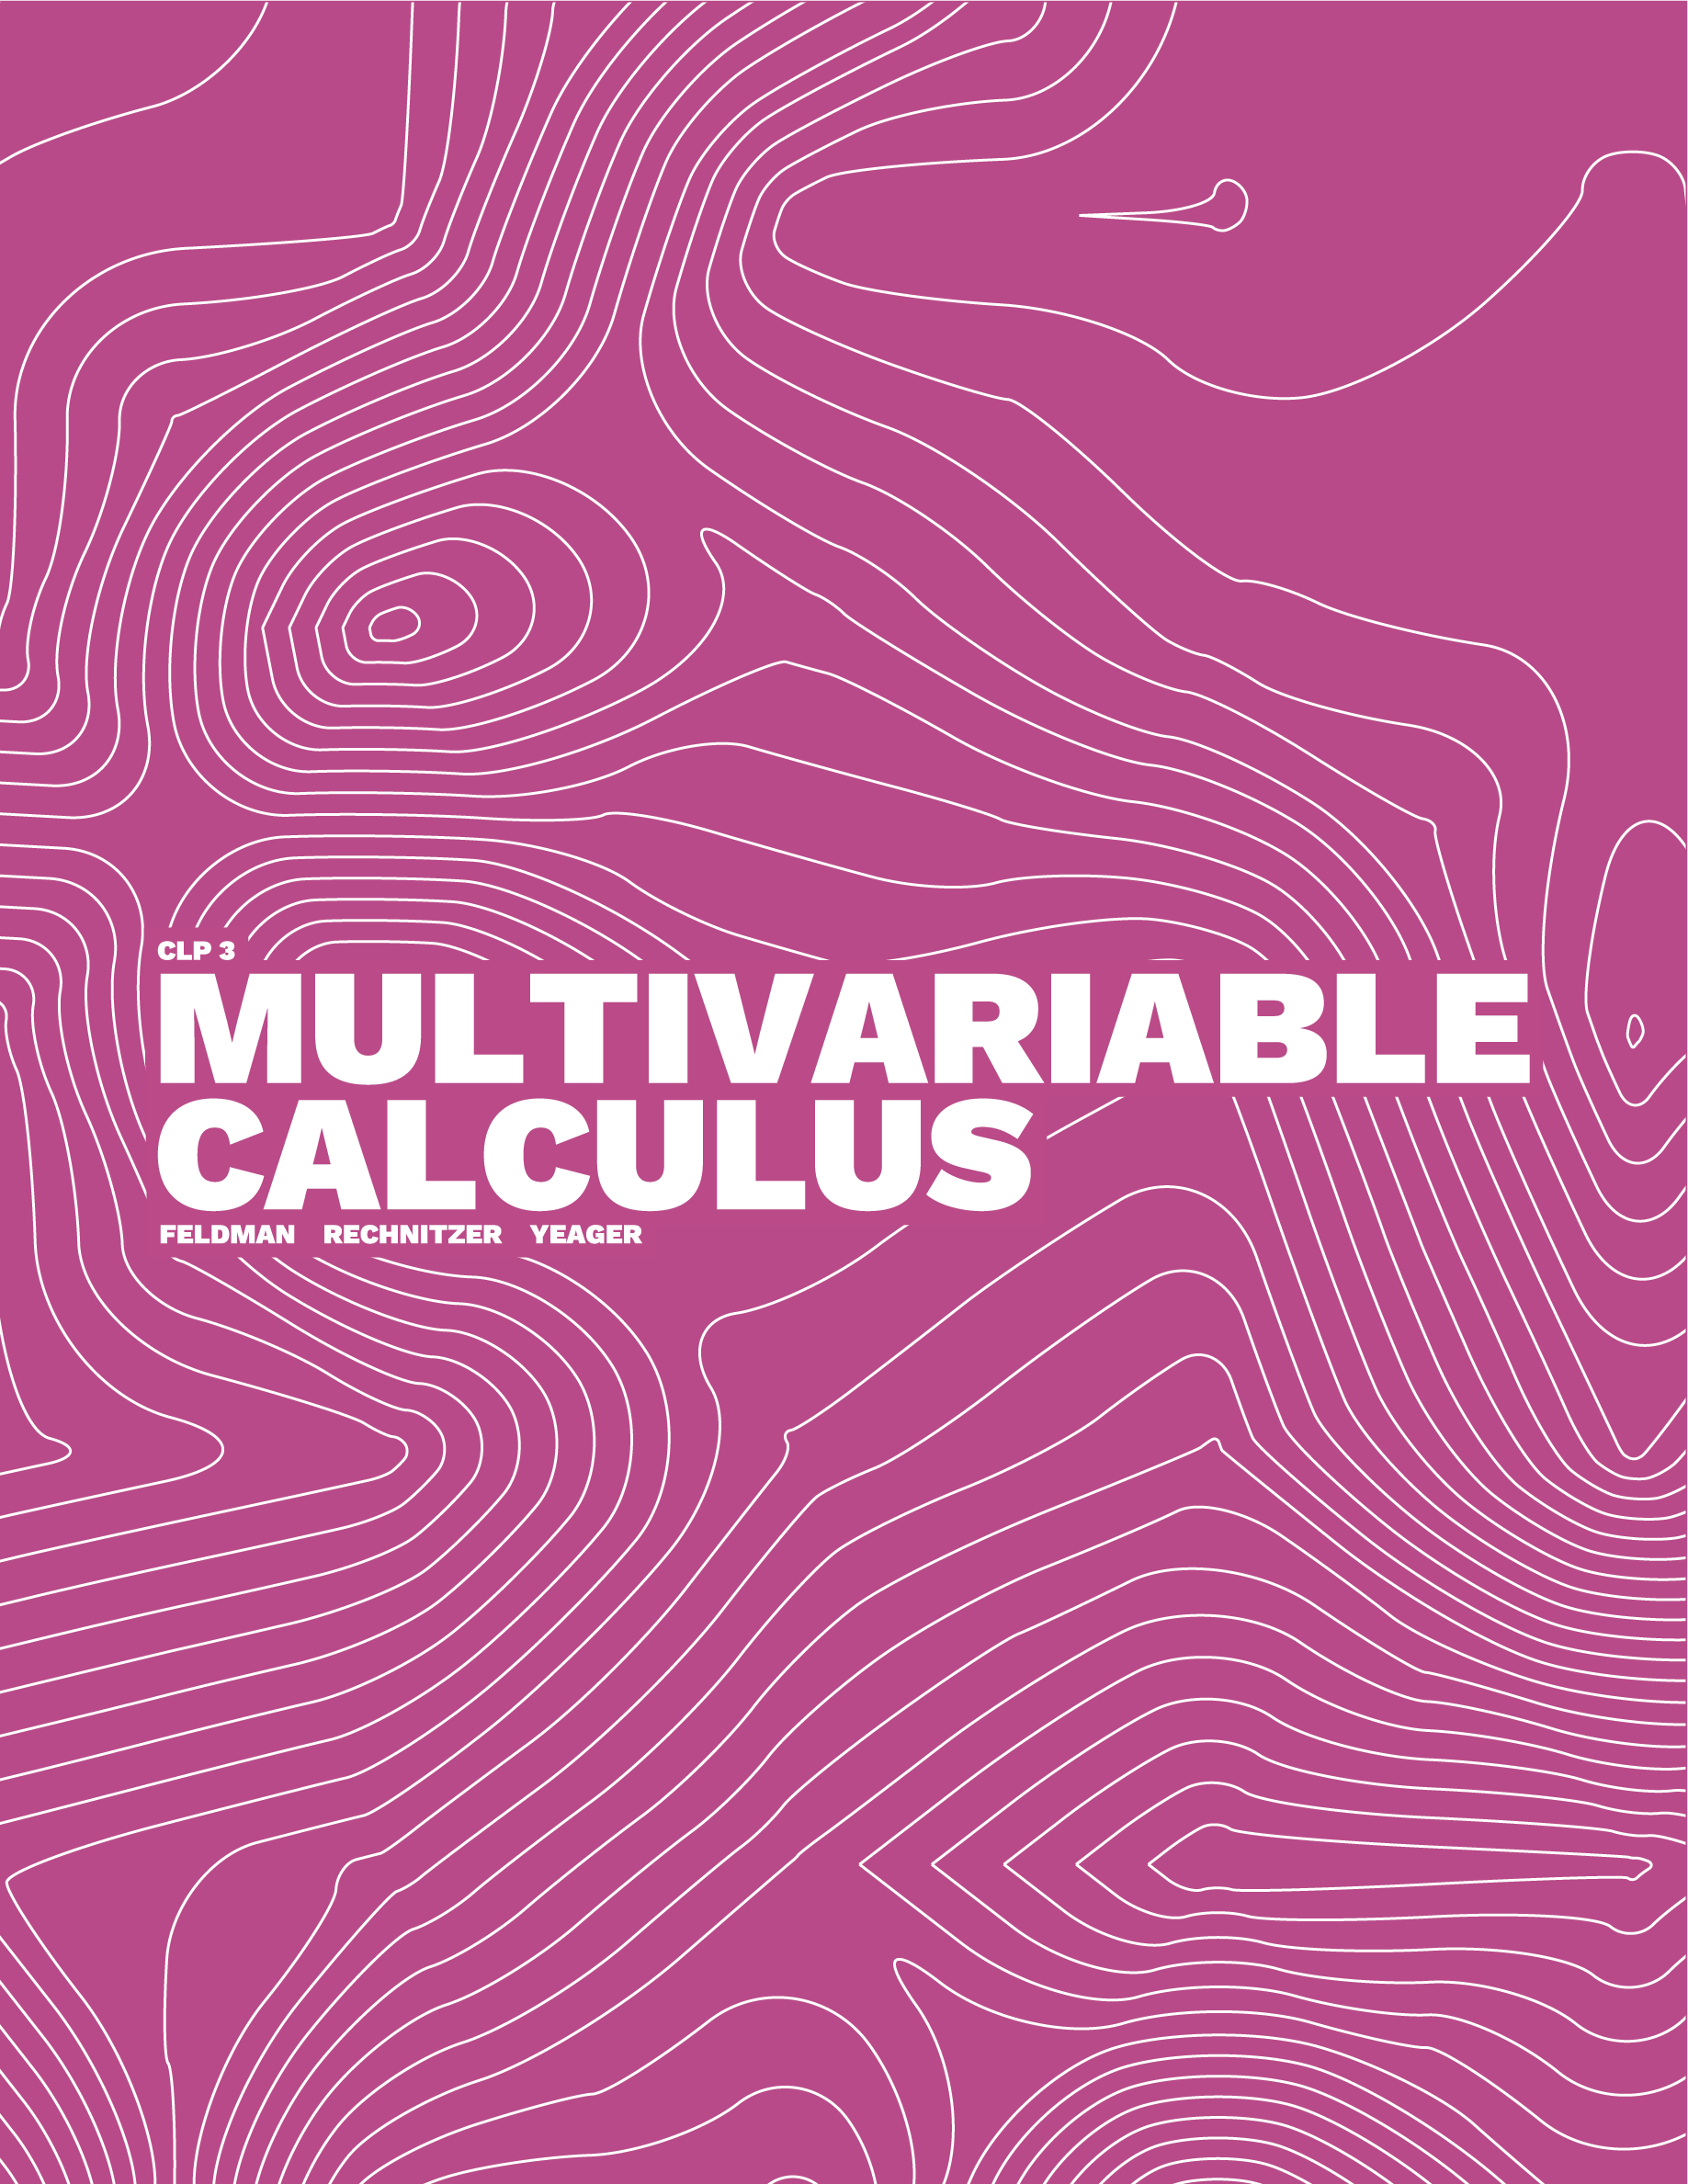 Multivariable Calculus textbook cover